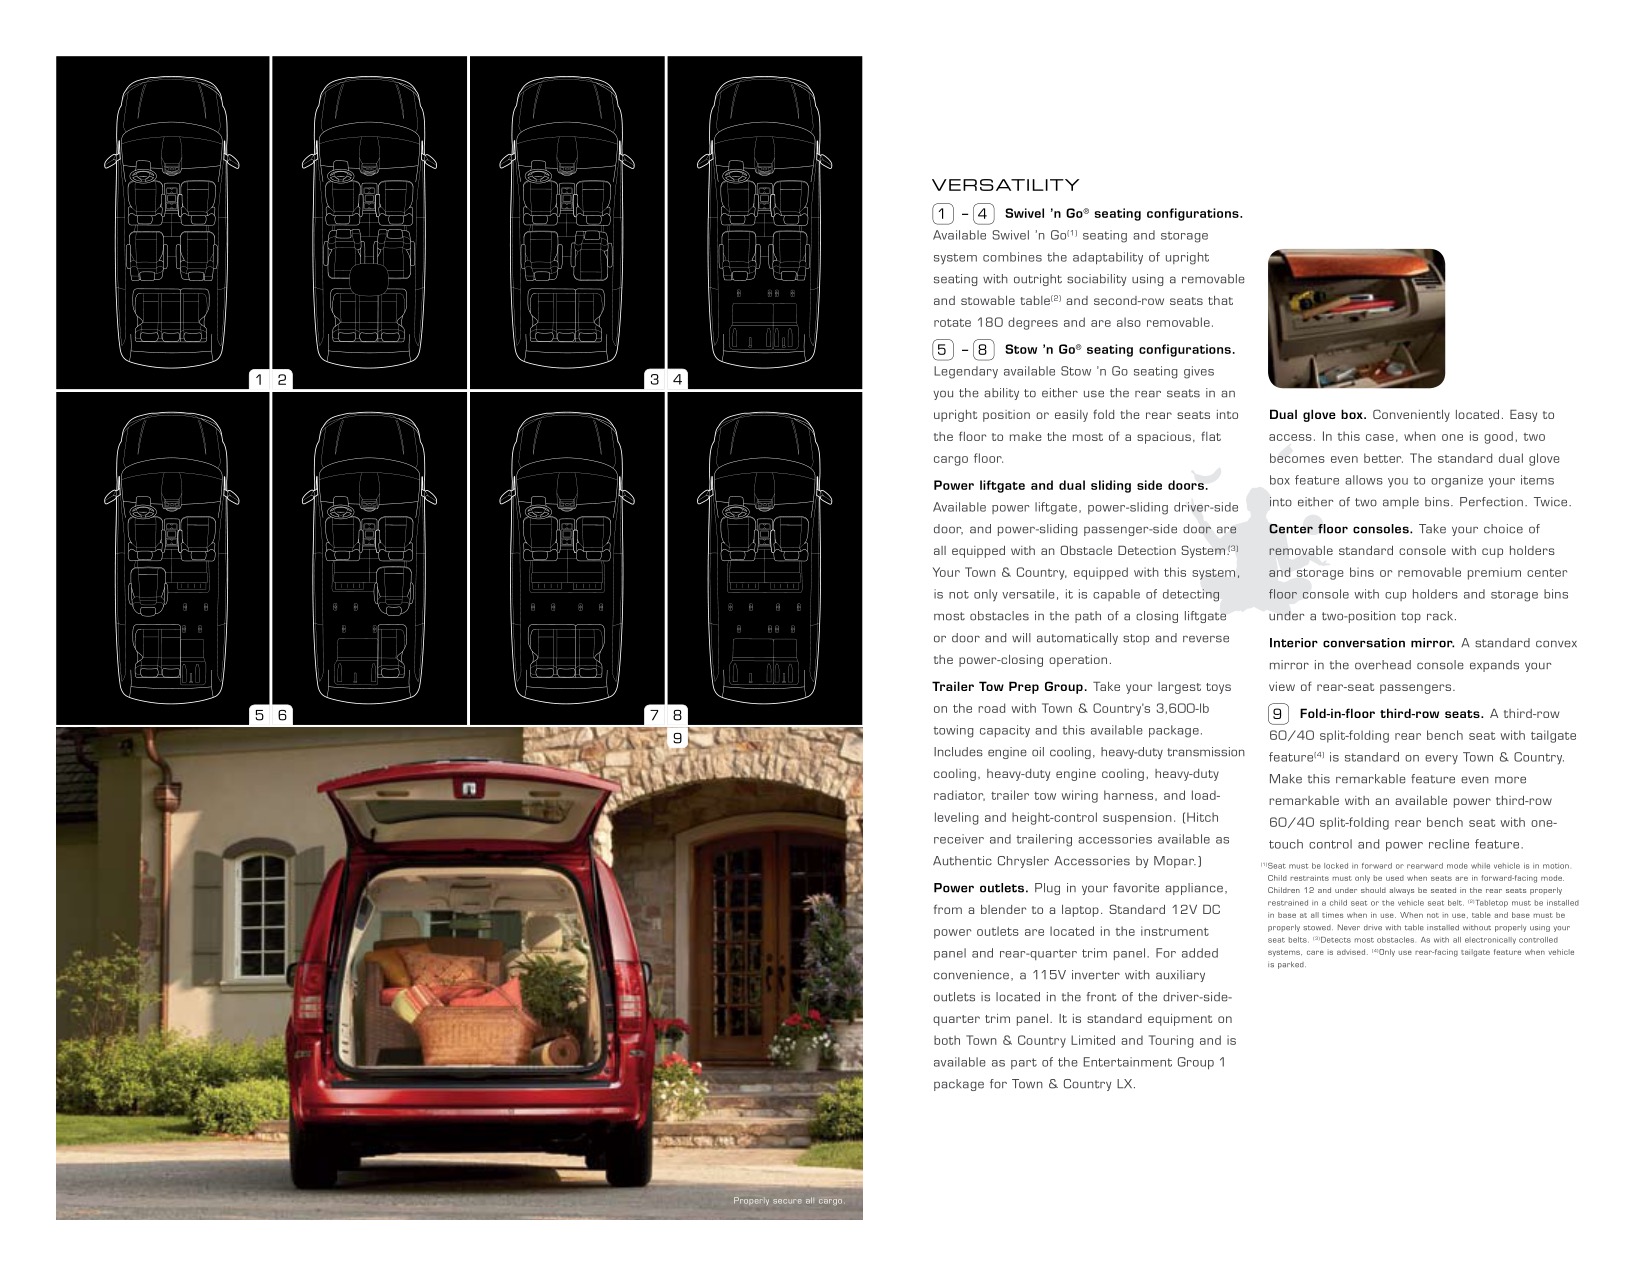 2009 Chrysler Town & Country Brochure Page 10